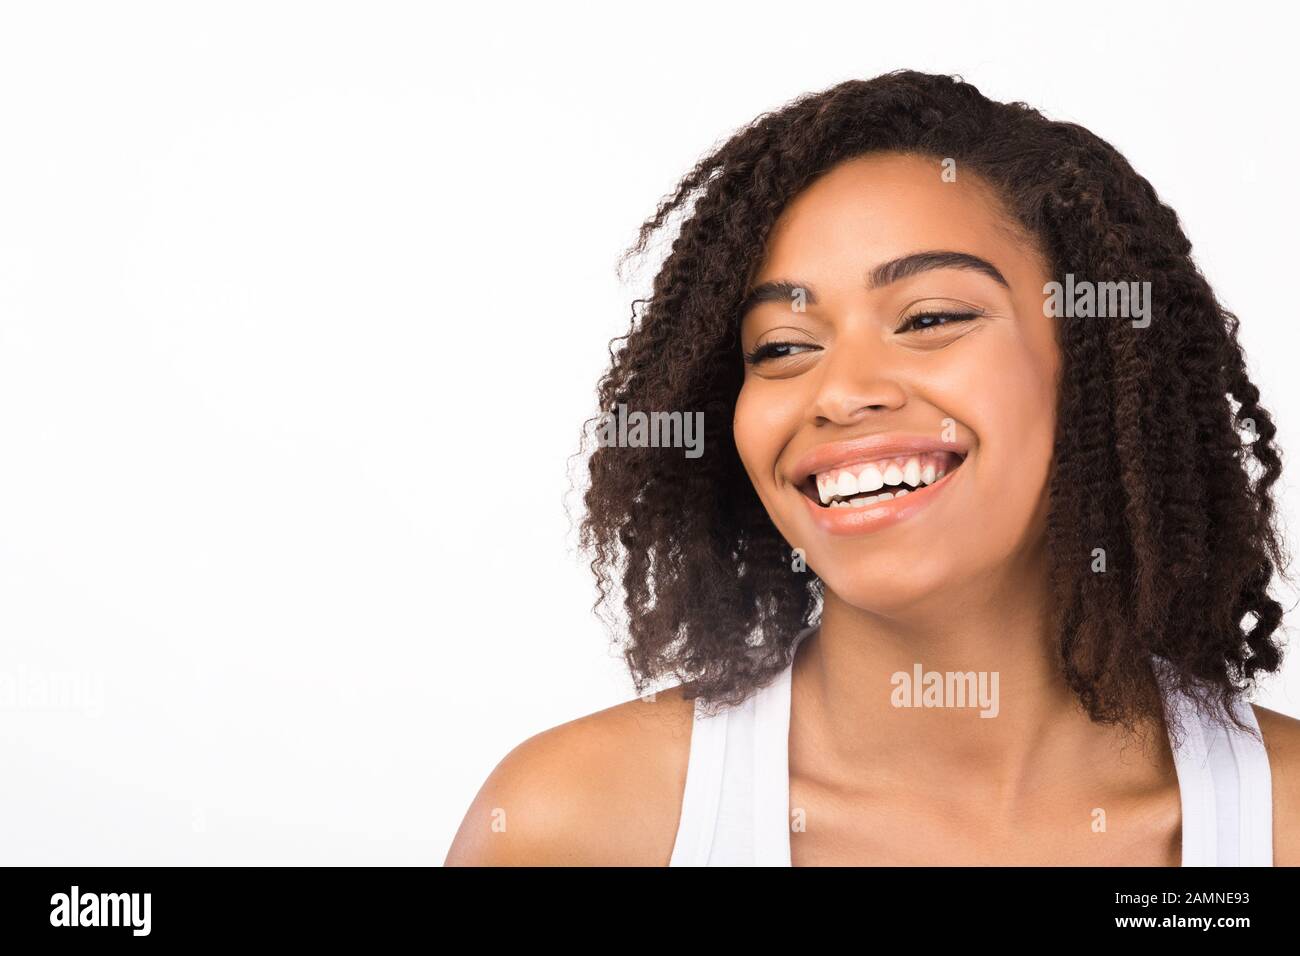 Close up portrait of laughing afro woman Stock Photo